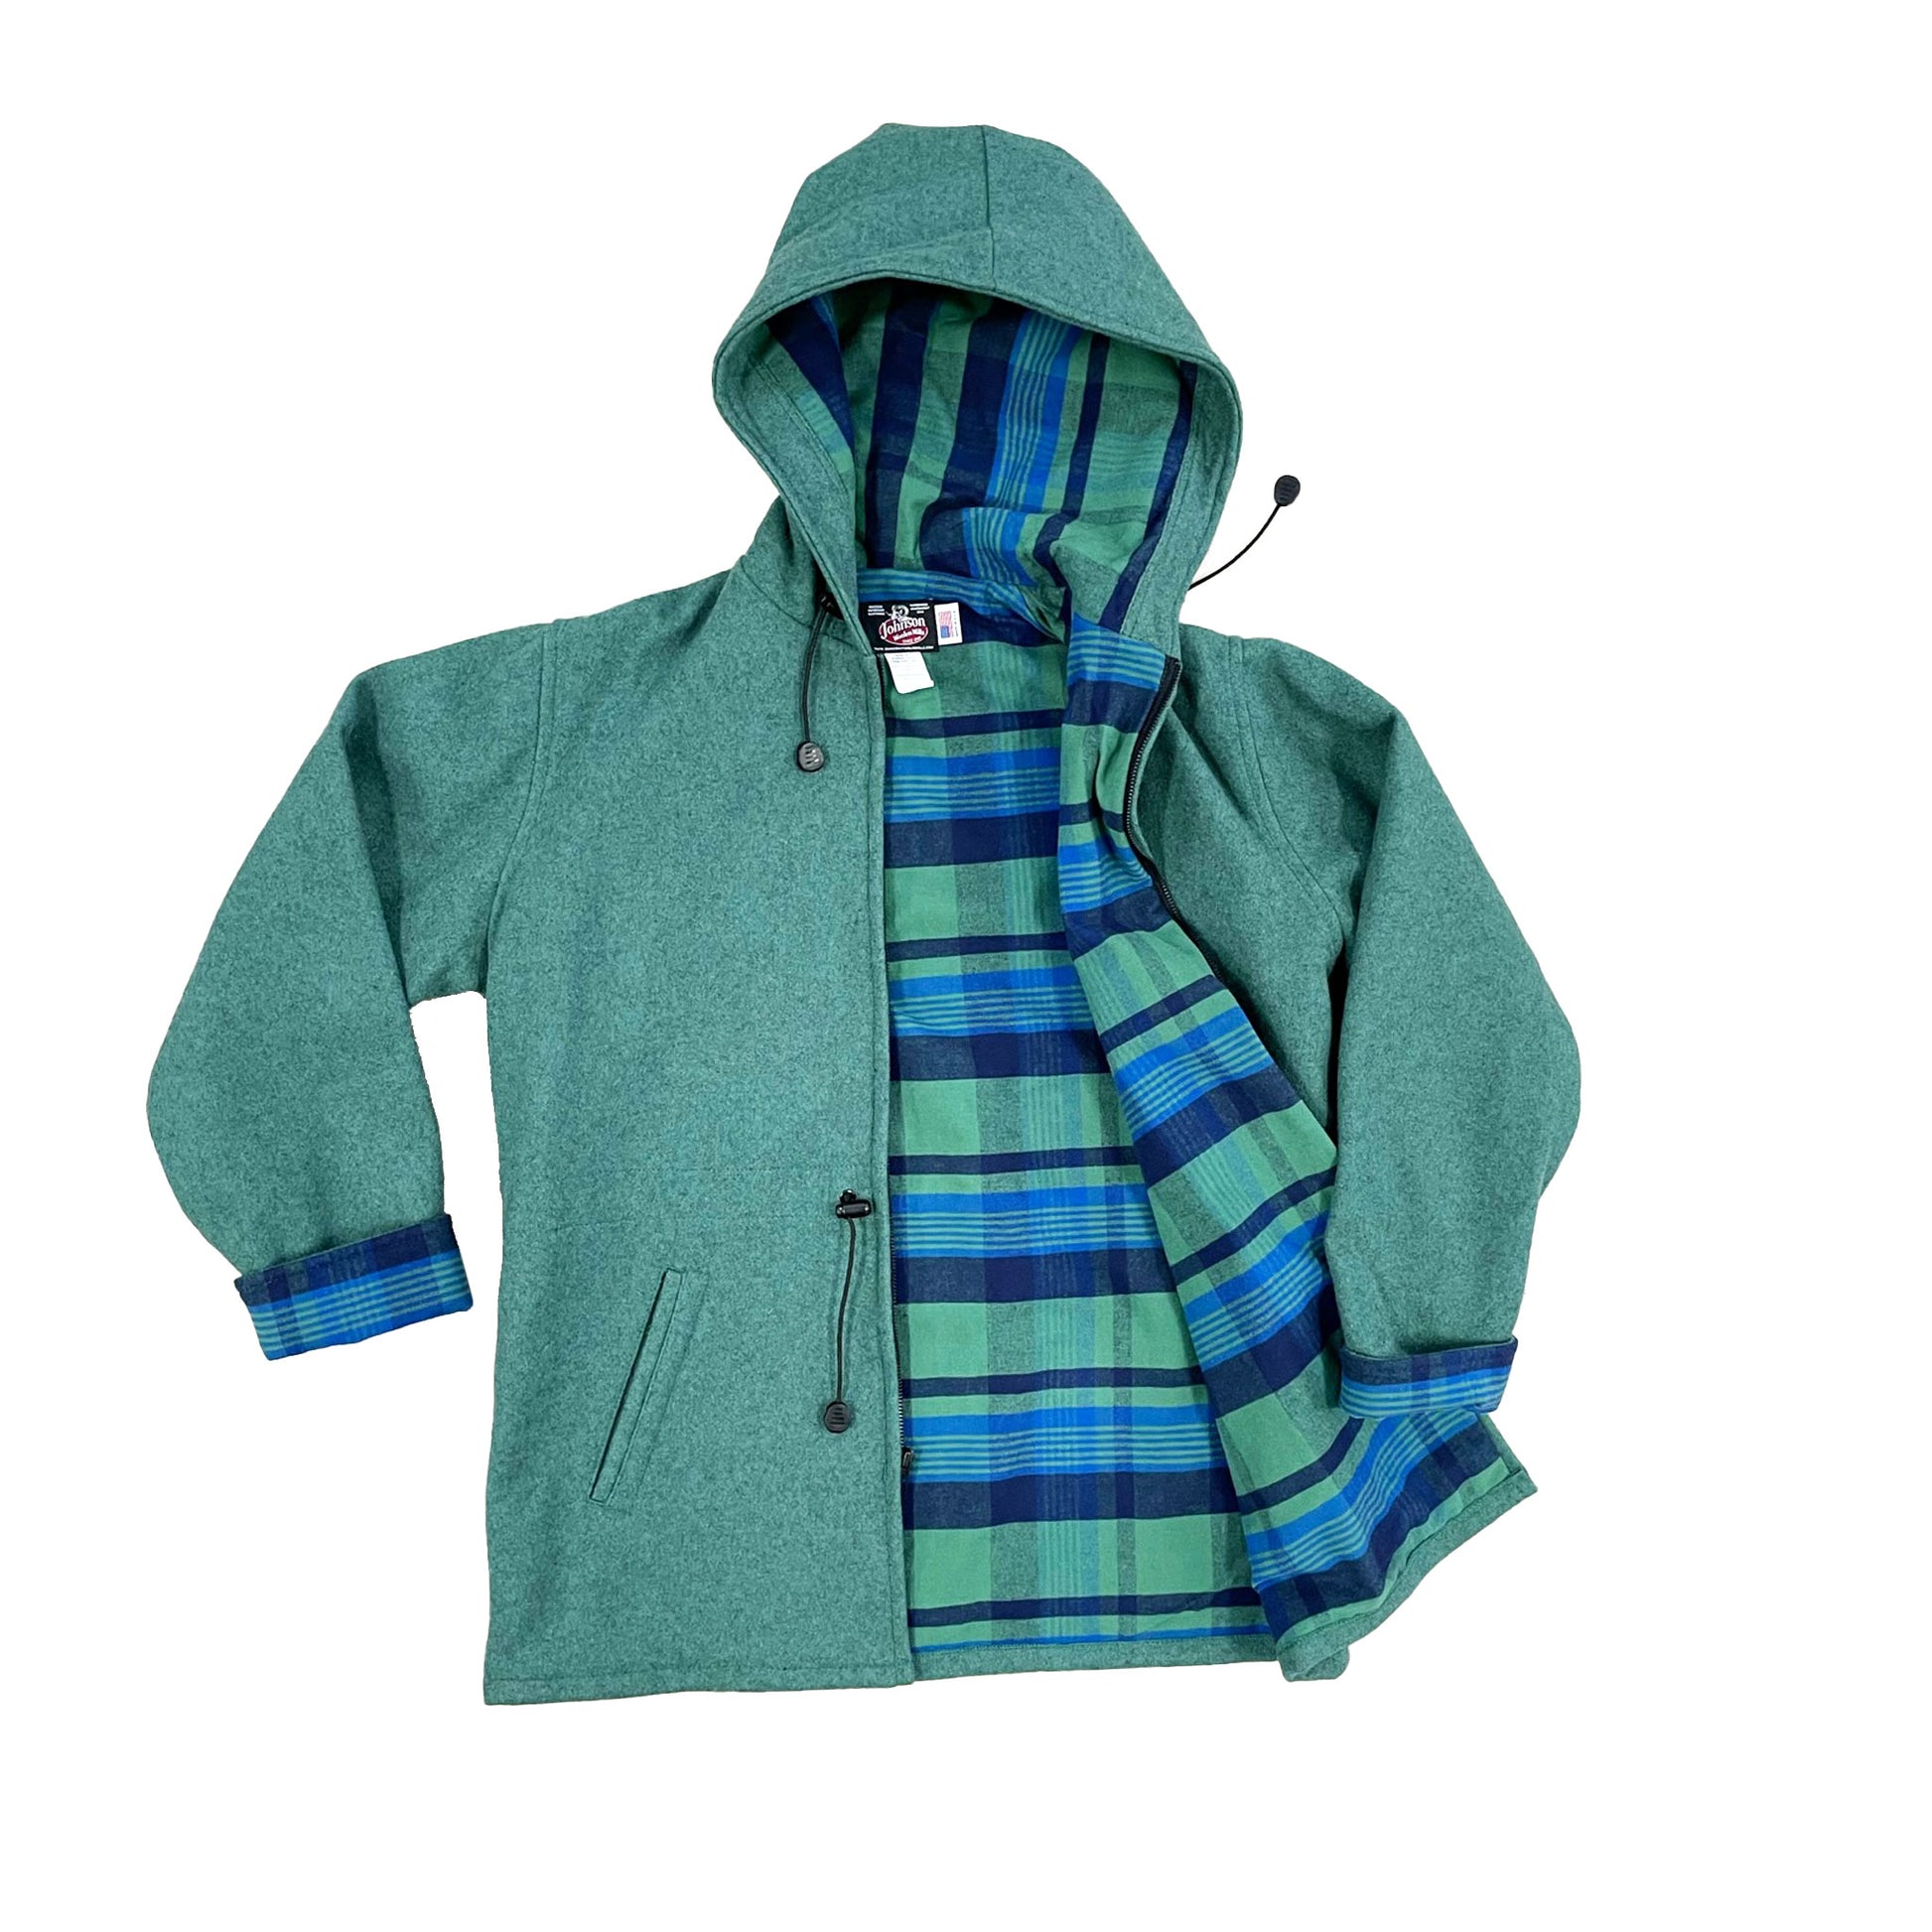 Johnson Woolen Mills Women's green wool anorak jacket with green and blue flannel lining